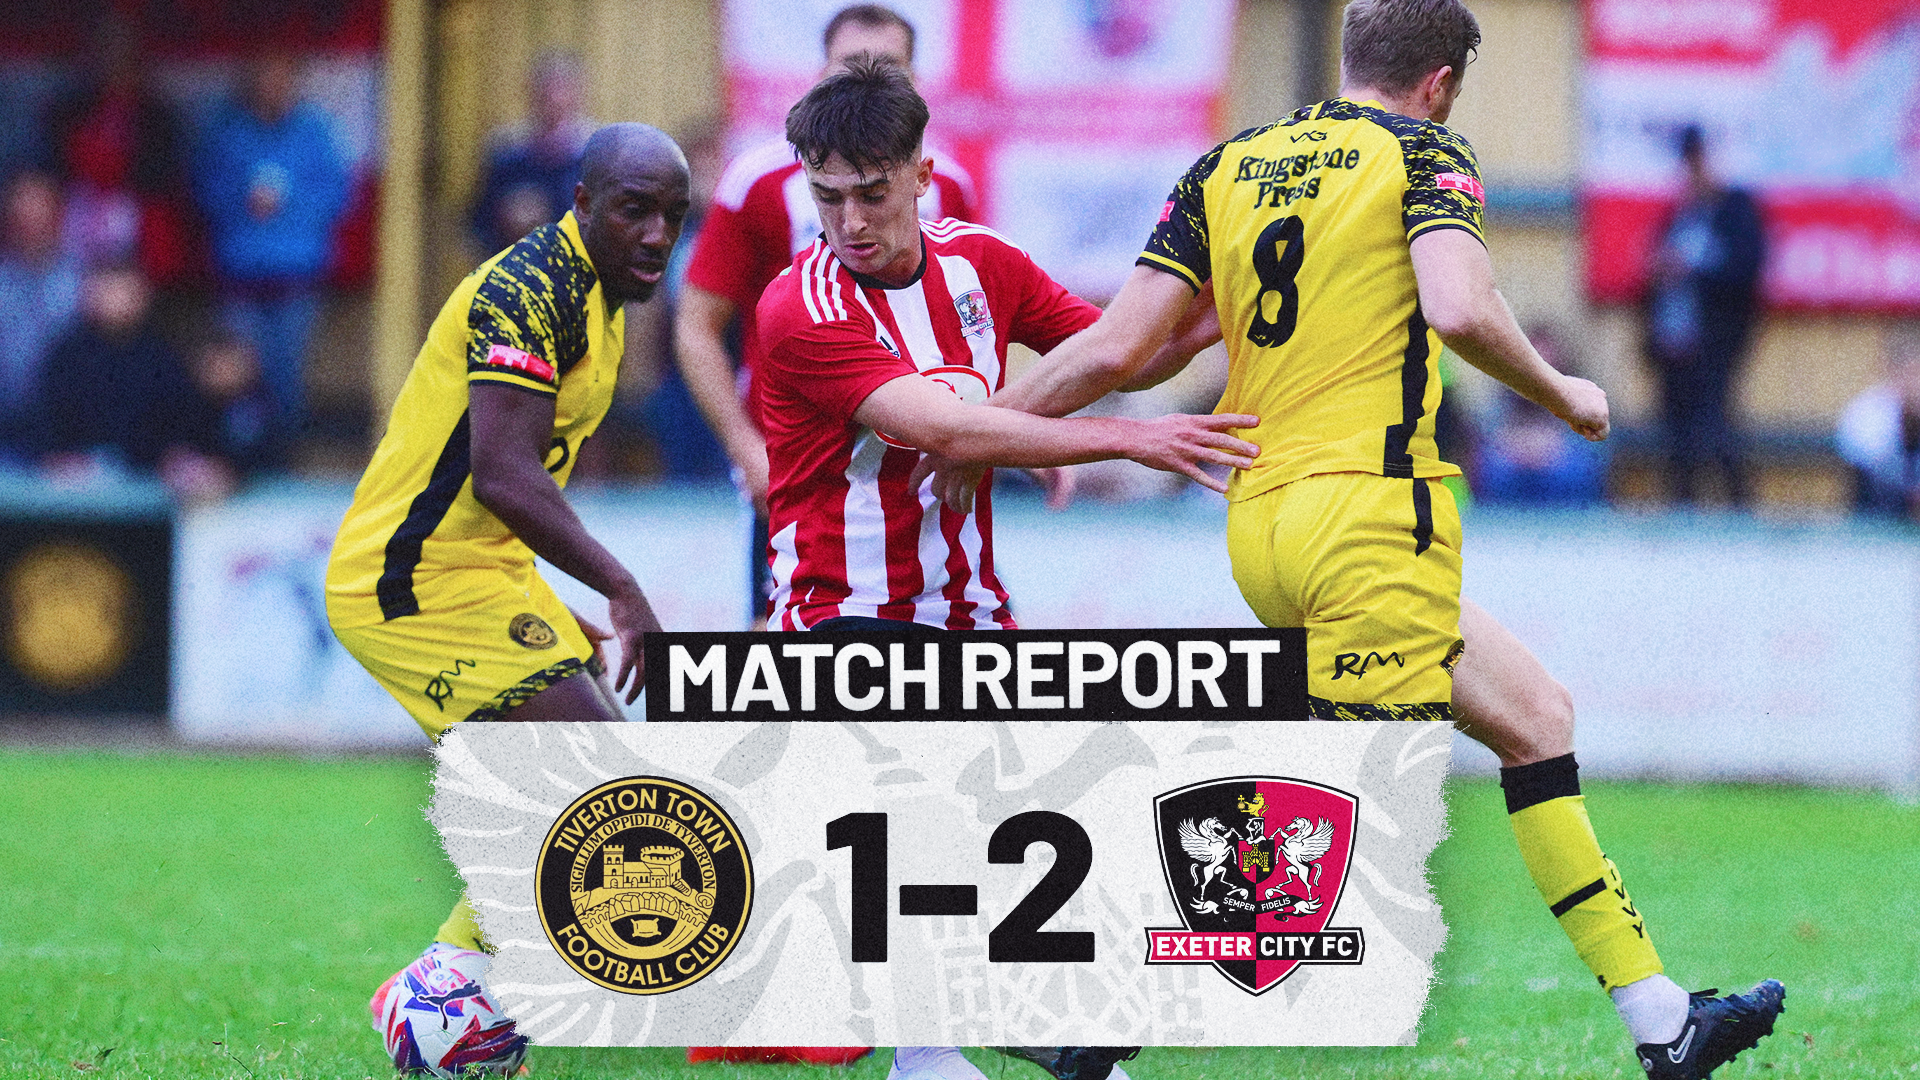 Match report for Tiverton Town 